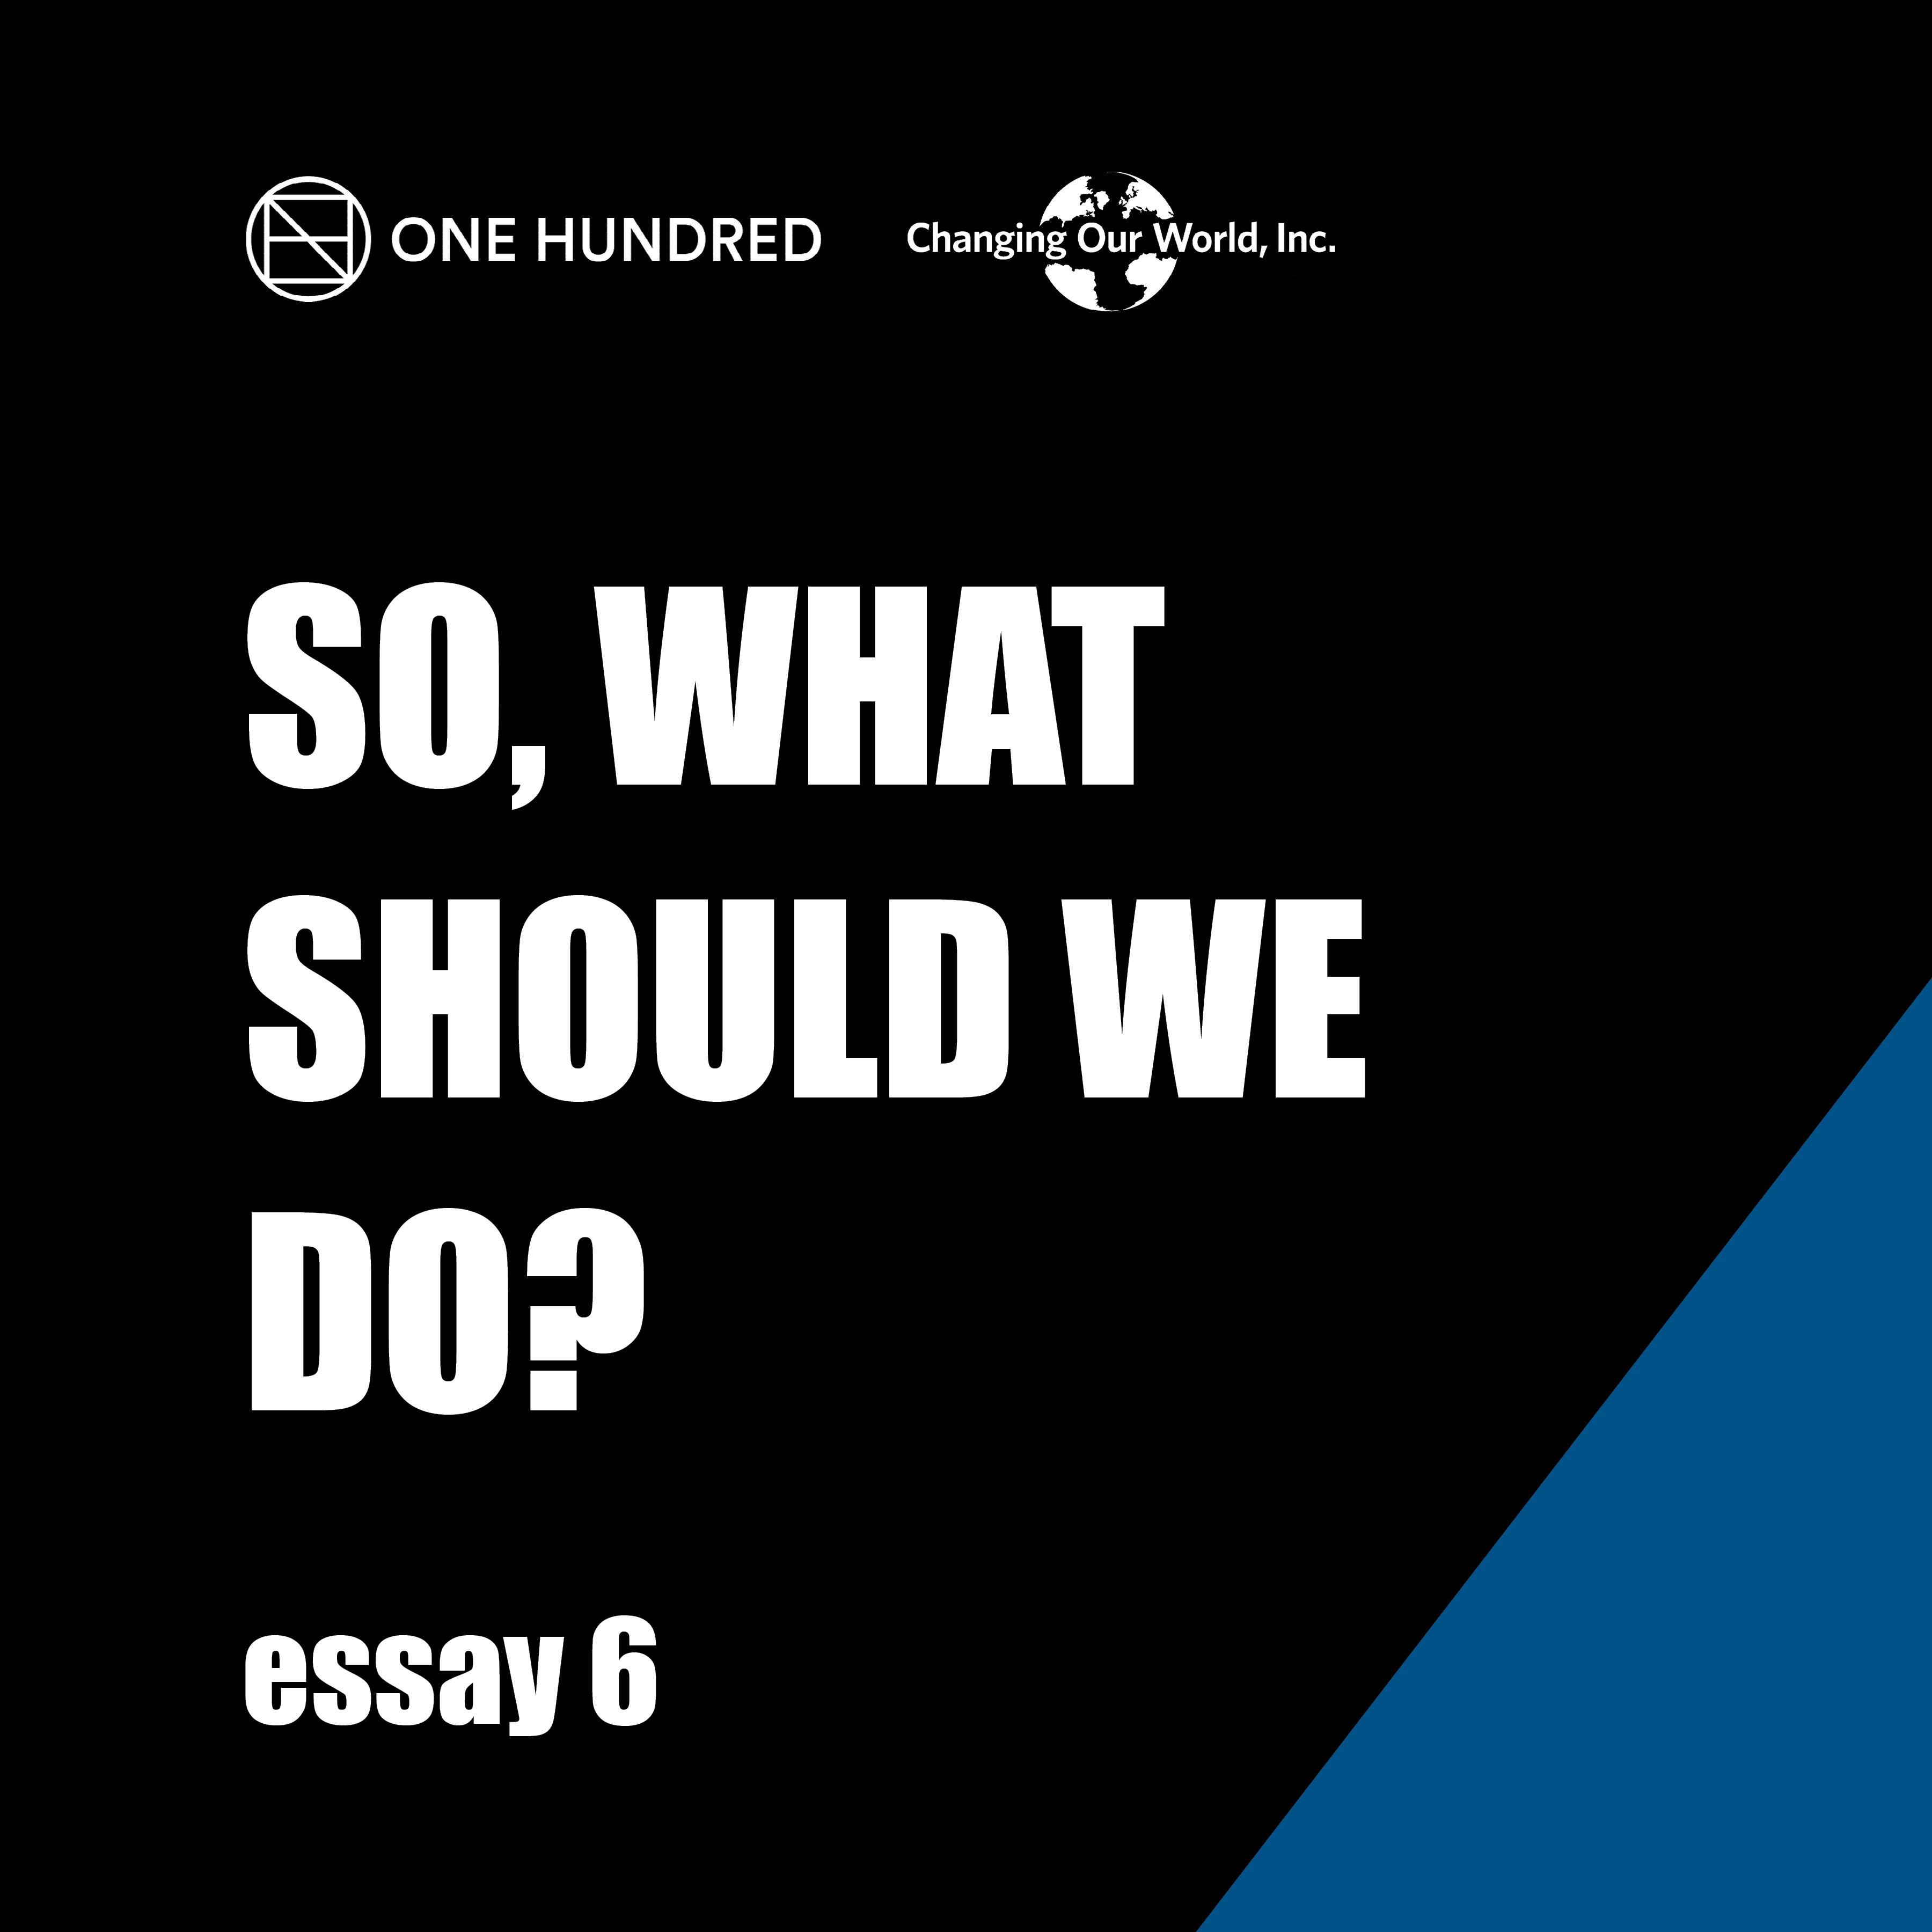 So, what should we do essay 6.